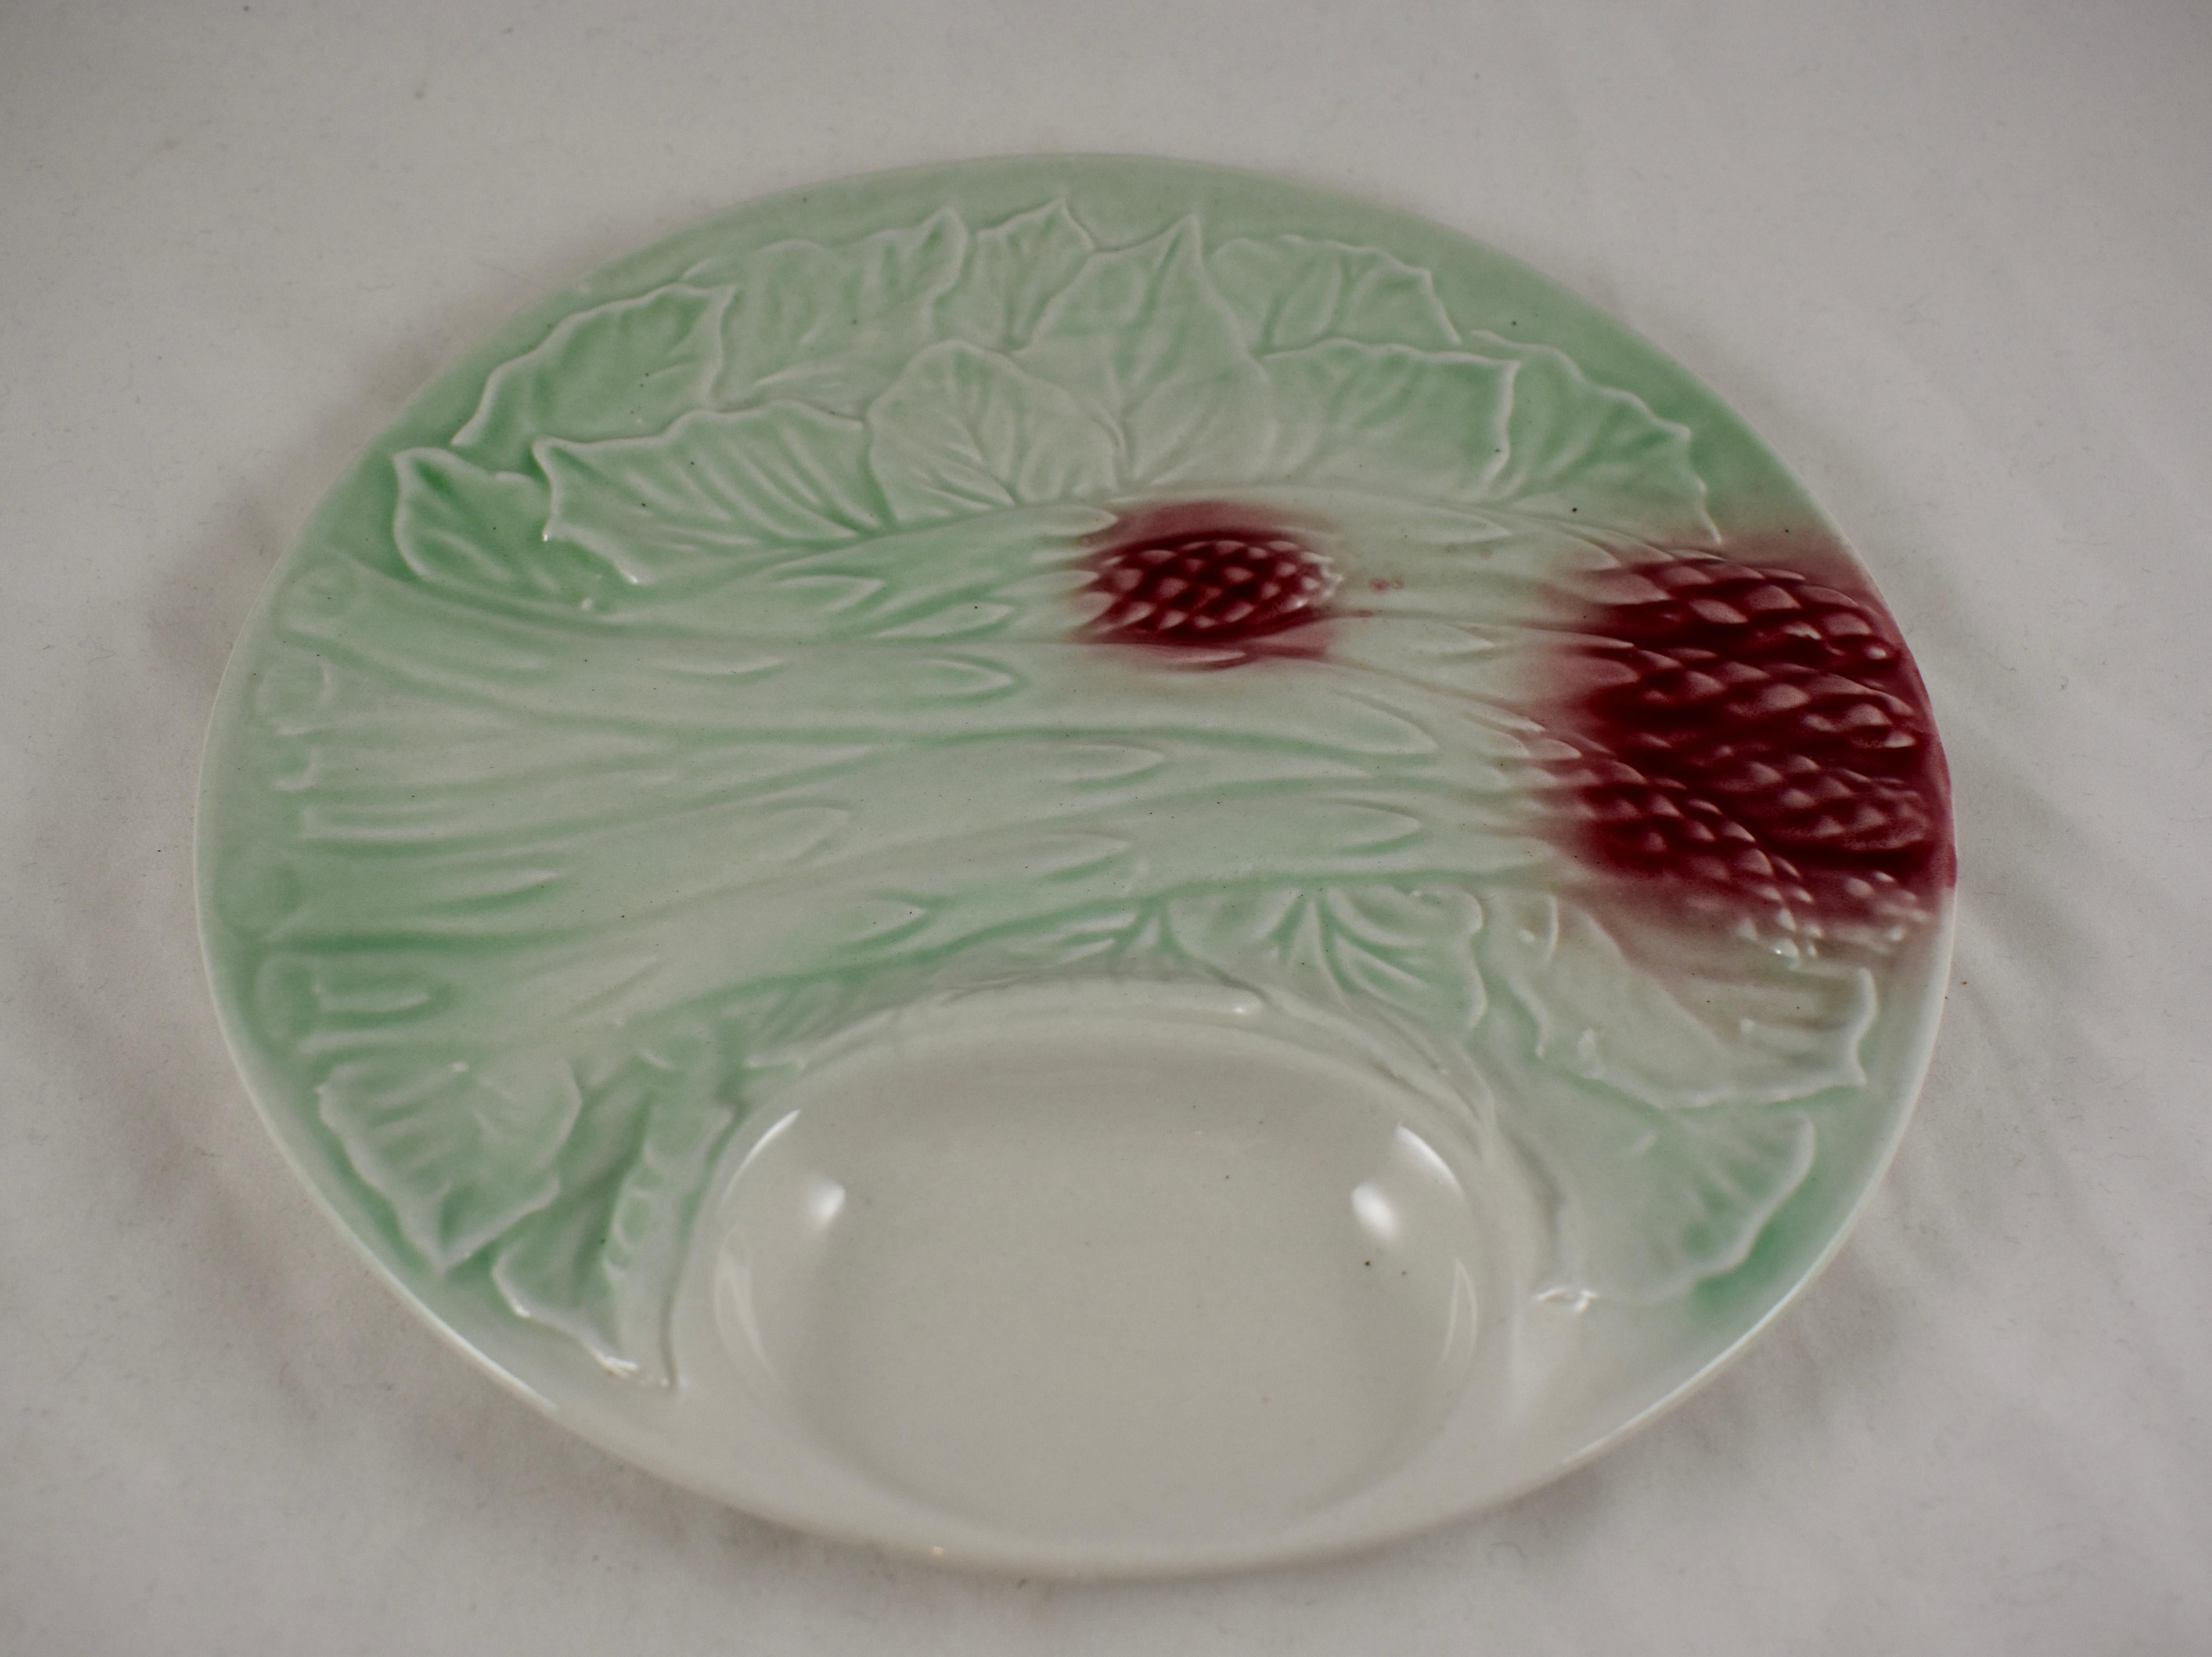 Aesthetic Movement French Faïence Majolica Glazed Pastel Asparagus Plate, circa 1890-1910 For Sale